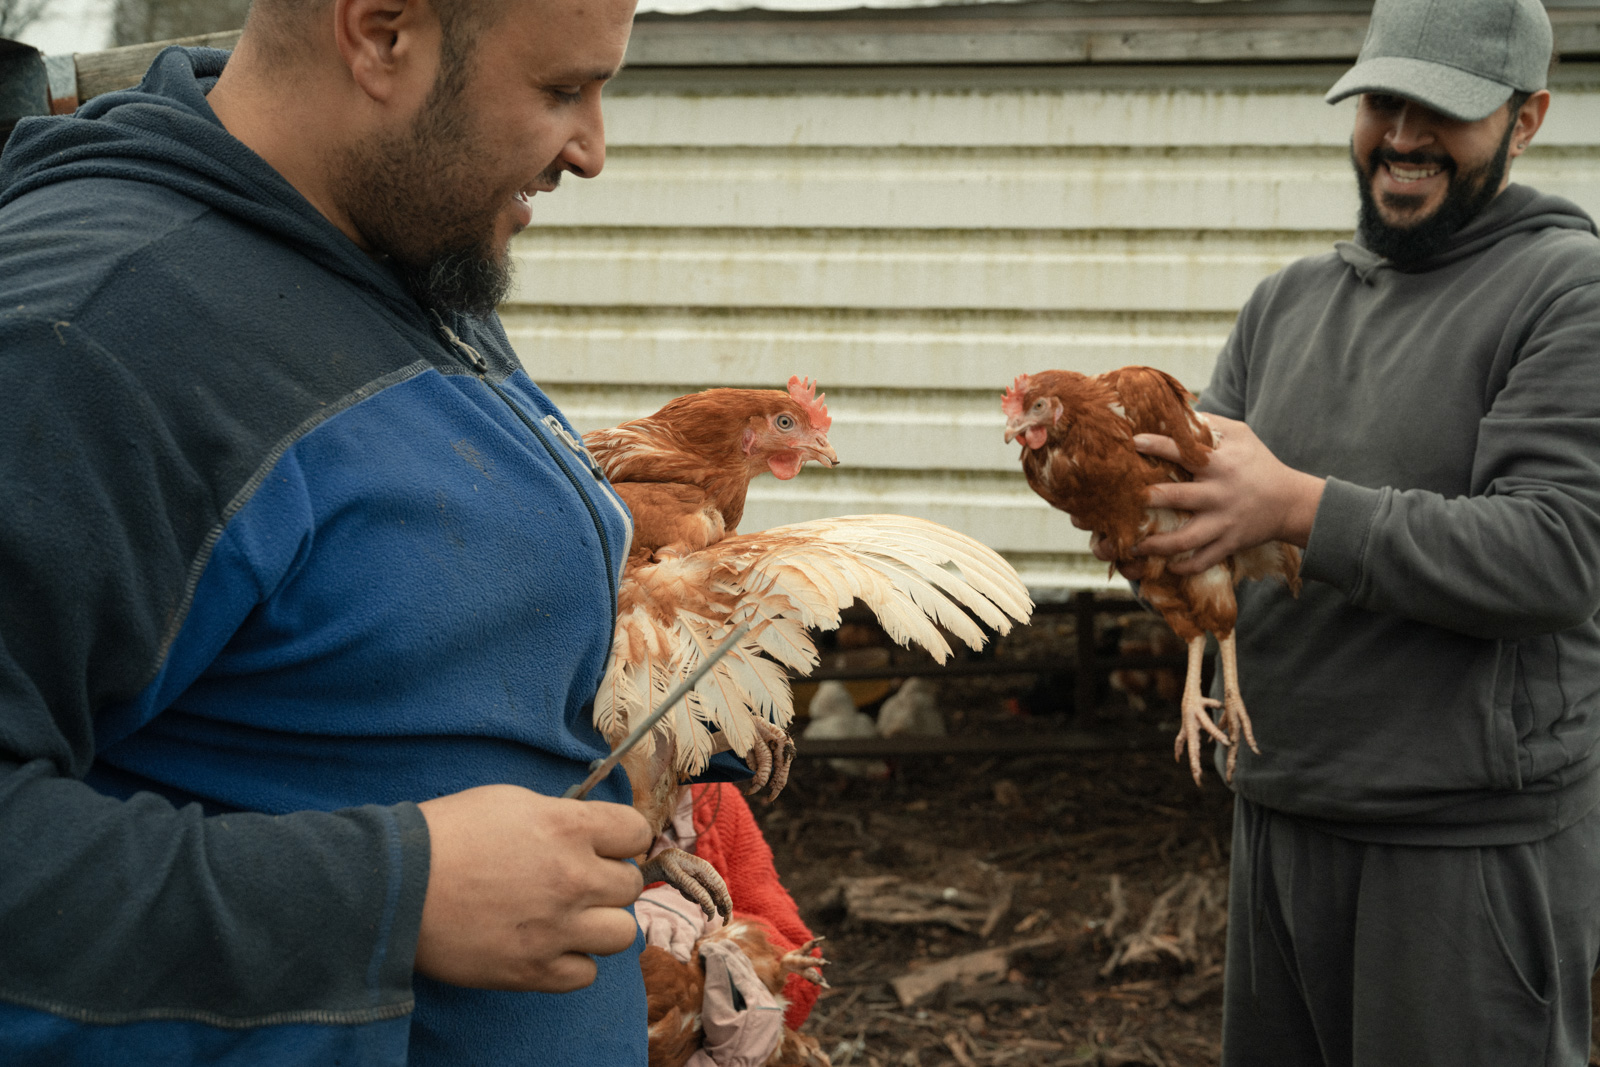 Muhsen Hassanin left his life in north London to set up a halal farm in South Wales